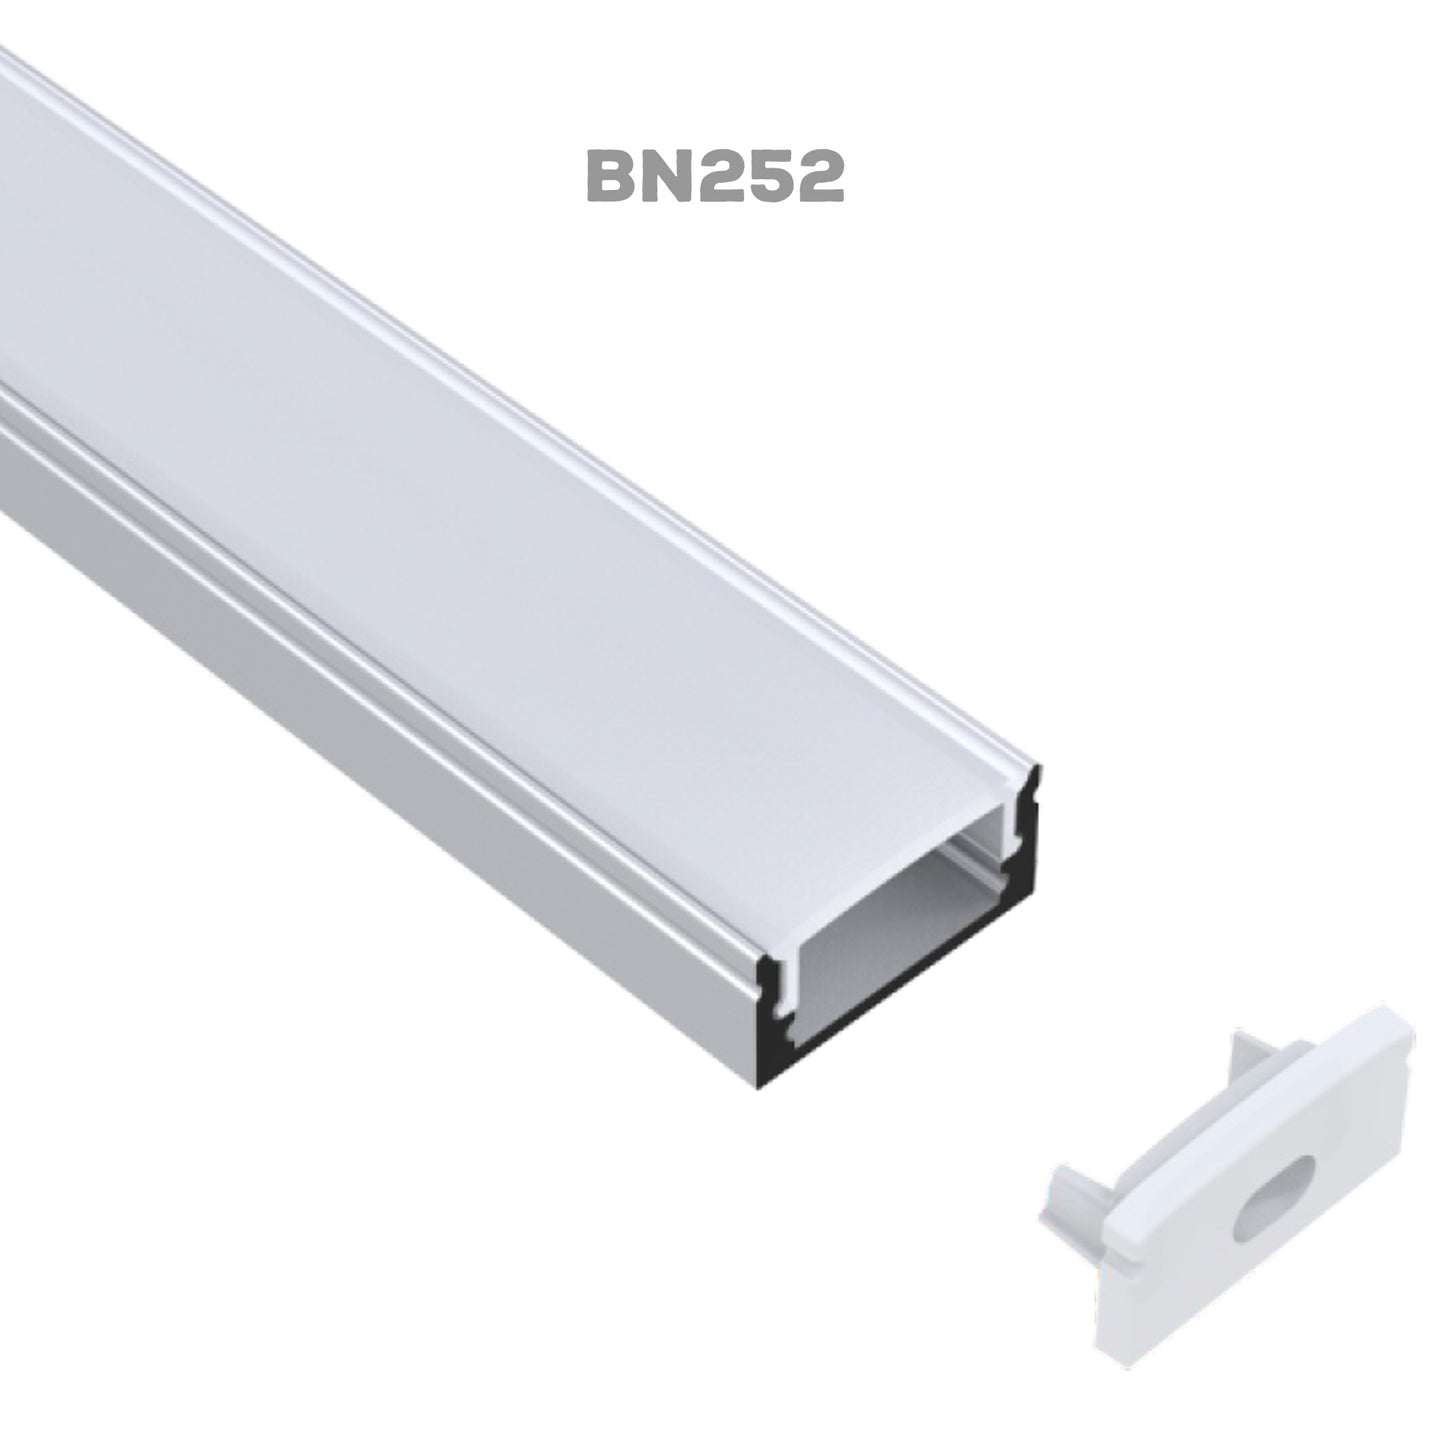 Aluminum Channel, Frosted Diffuser cover, BN252Aluminum Channel, Frosted Diffuser cover, BN252